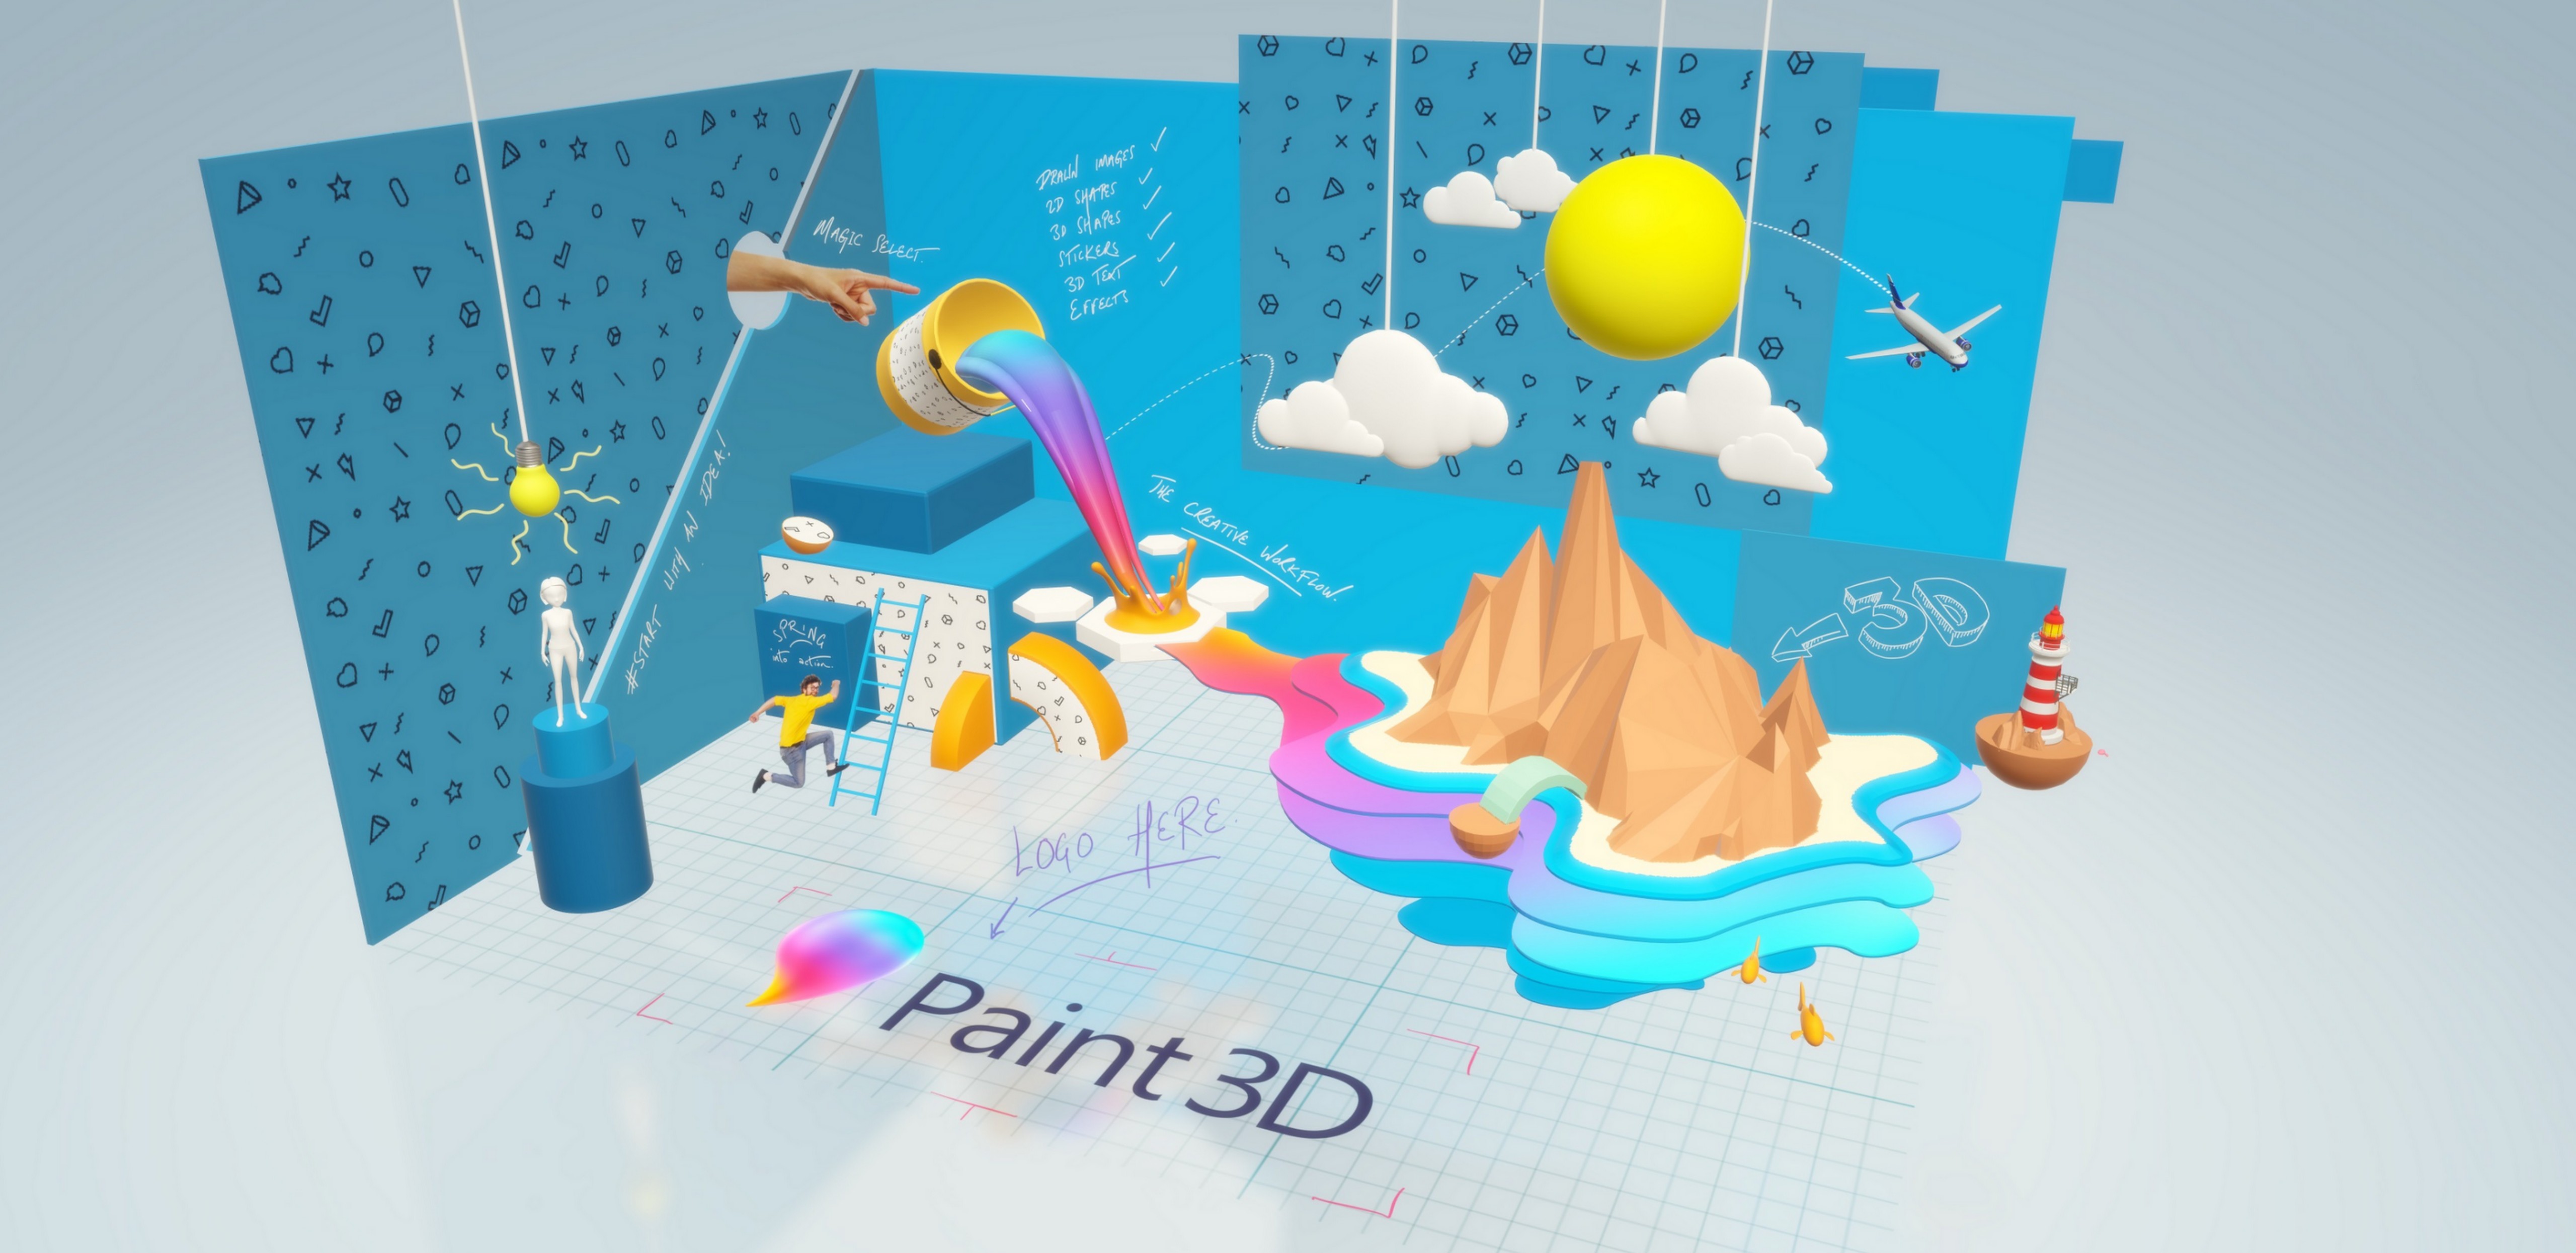 Windows 10 Tip A Guide To The Basic Tools In Paint 3d Windows